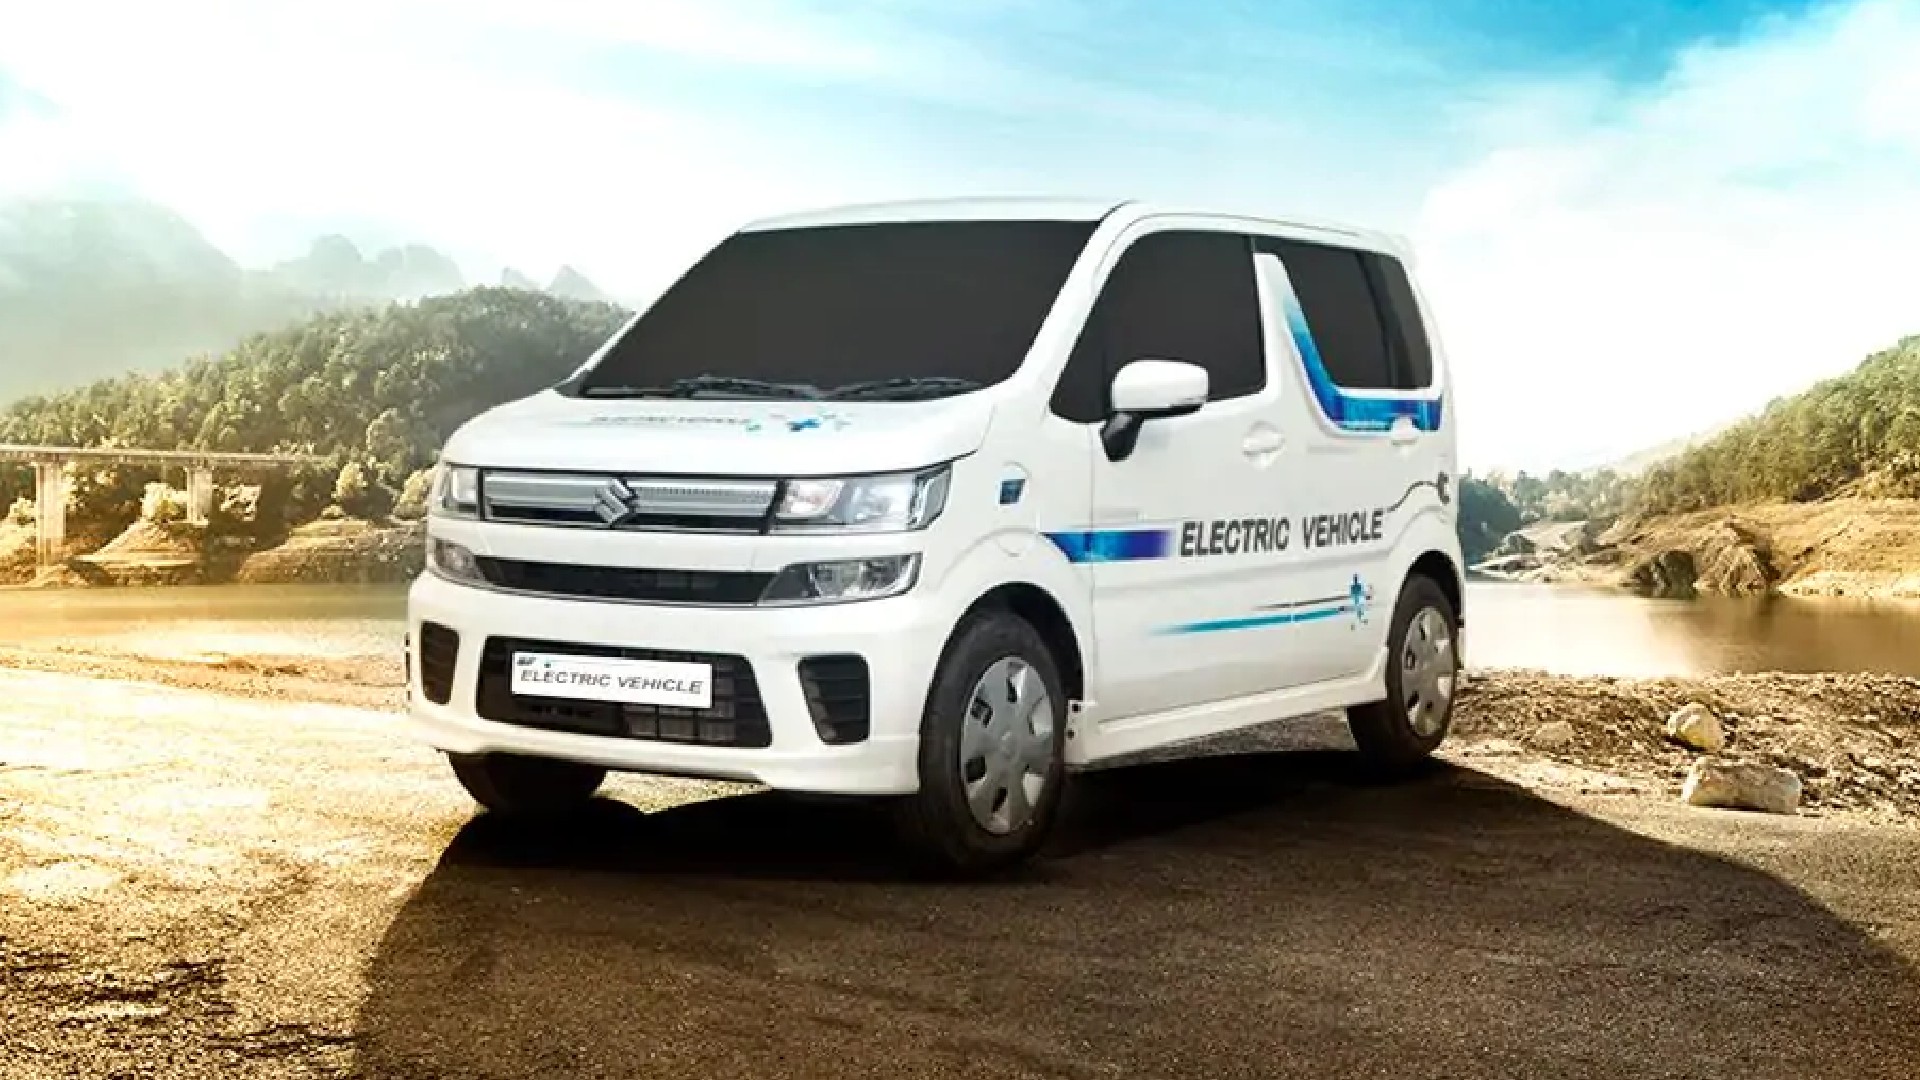 Maruti’s 1st Electric Car: WagonR EV Is Almost Ready To Hit The Roads! Expected Price, Launch Date?